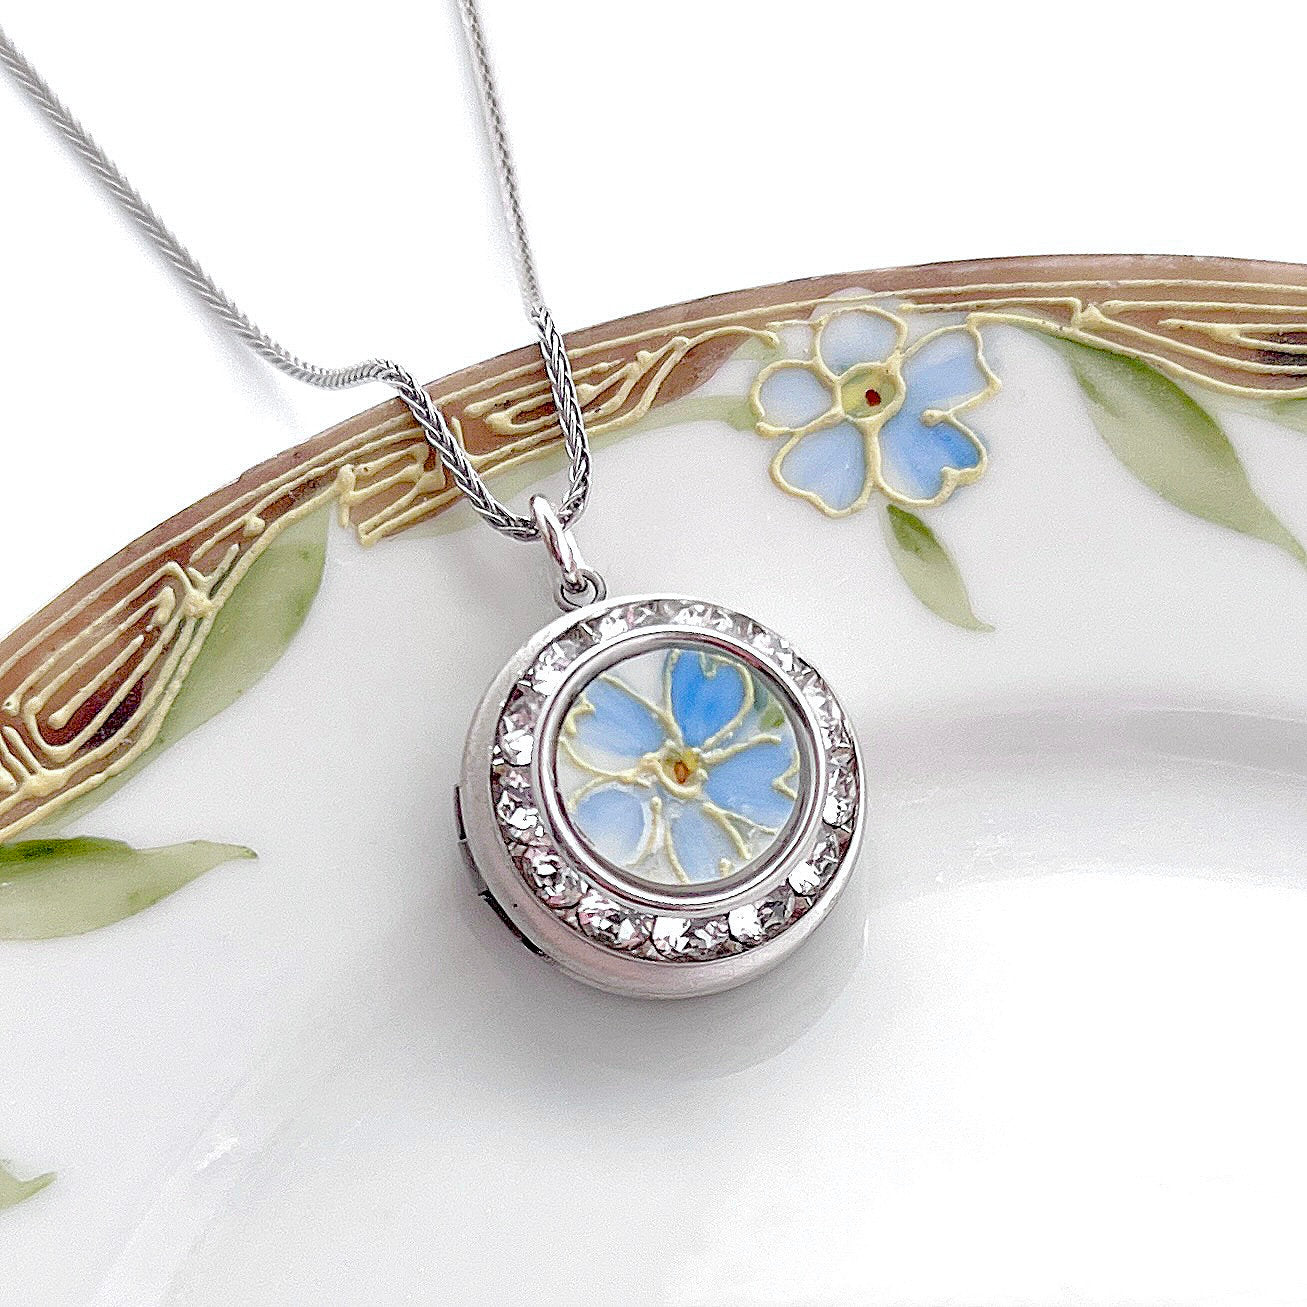 Forget Me Not Locket Necklace for Your Love, Girlfriend Gifts, Antique Porcelain, Crystal Jewelry